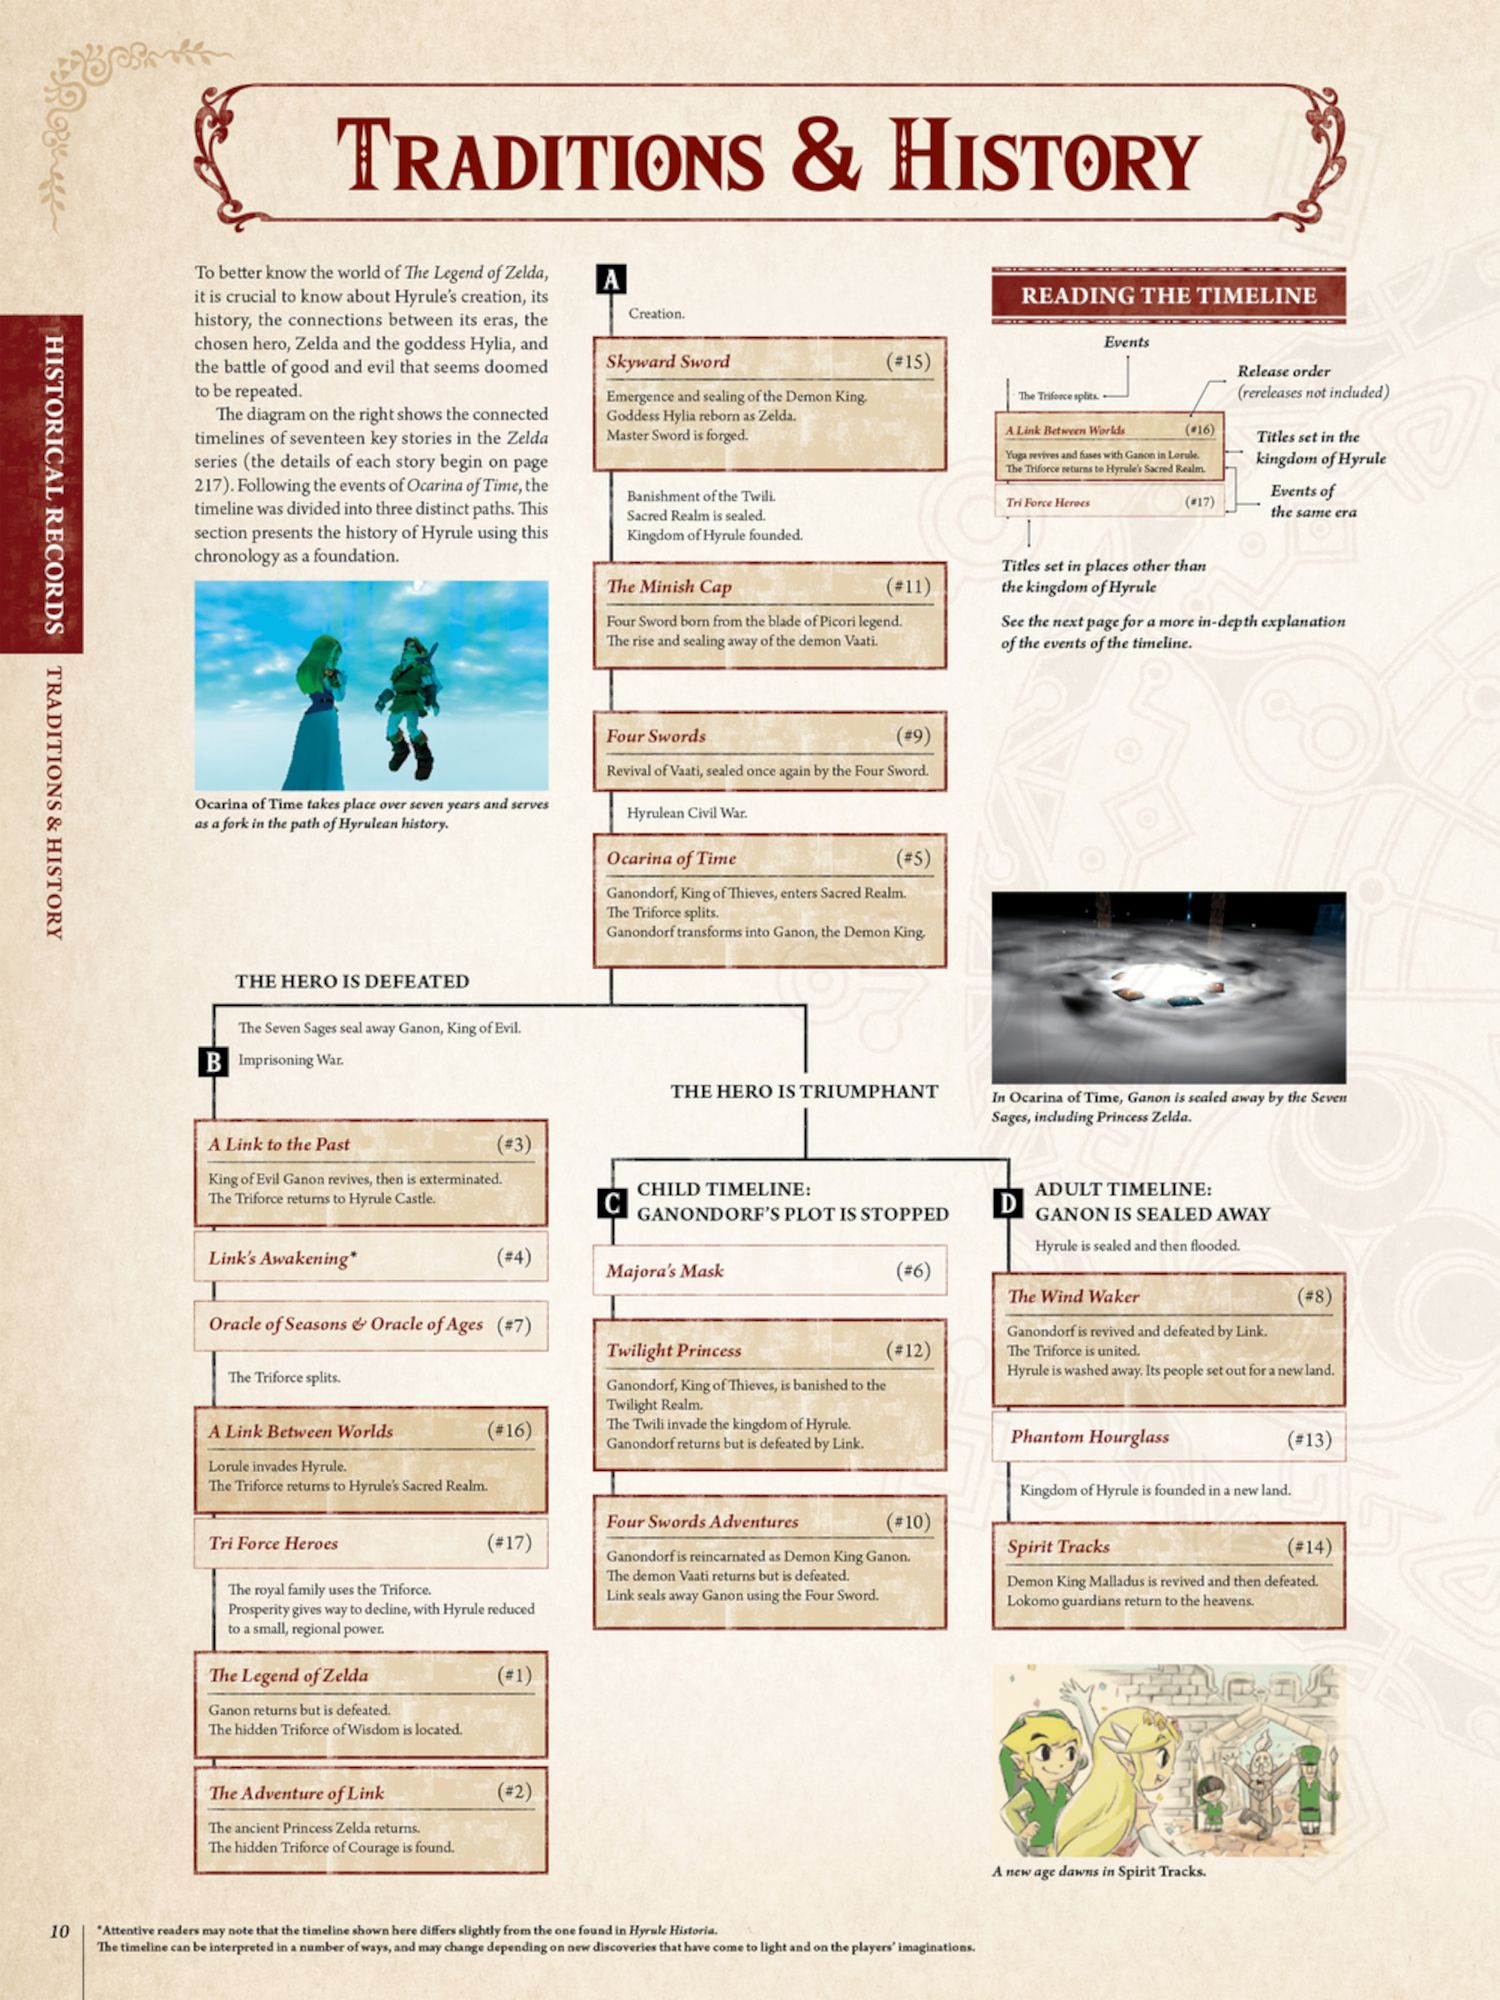 Official Nintendo Timeline of the Legend of Zelda from the Encyclopedia